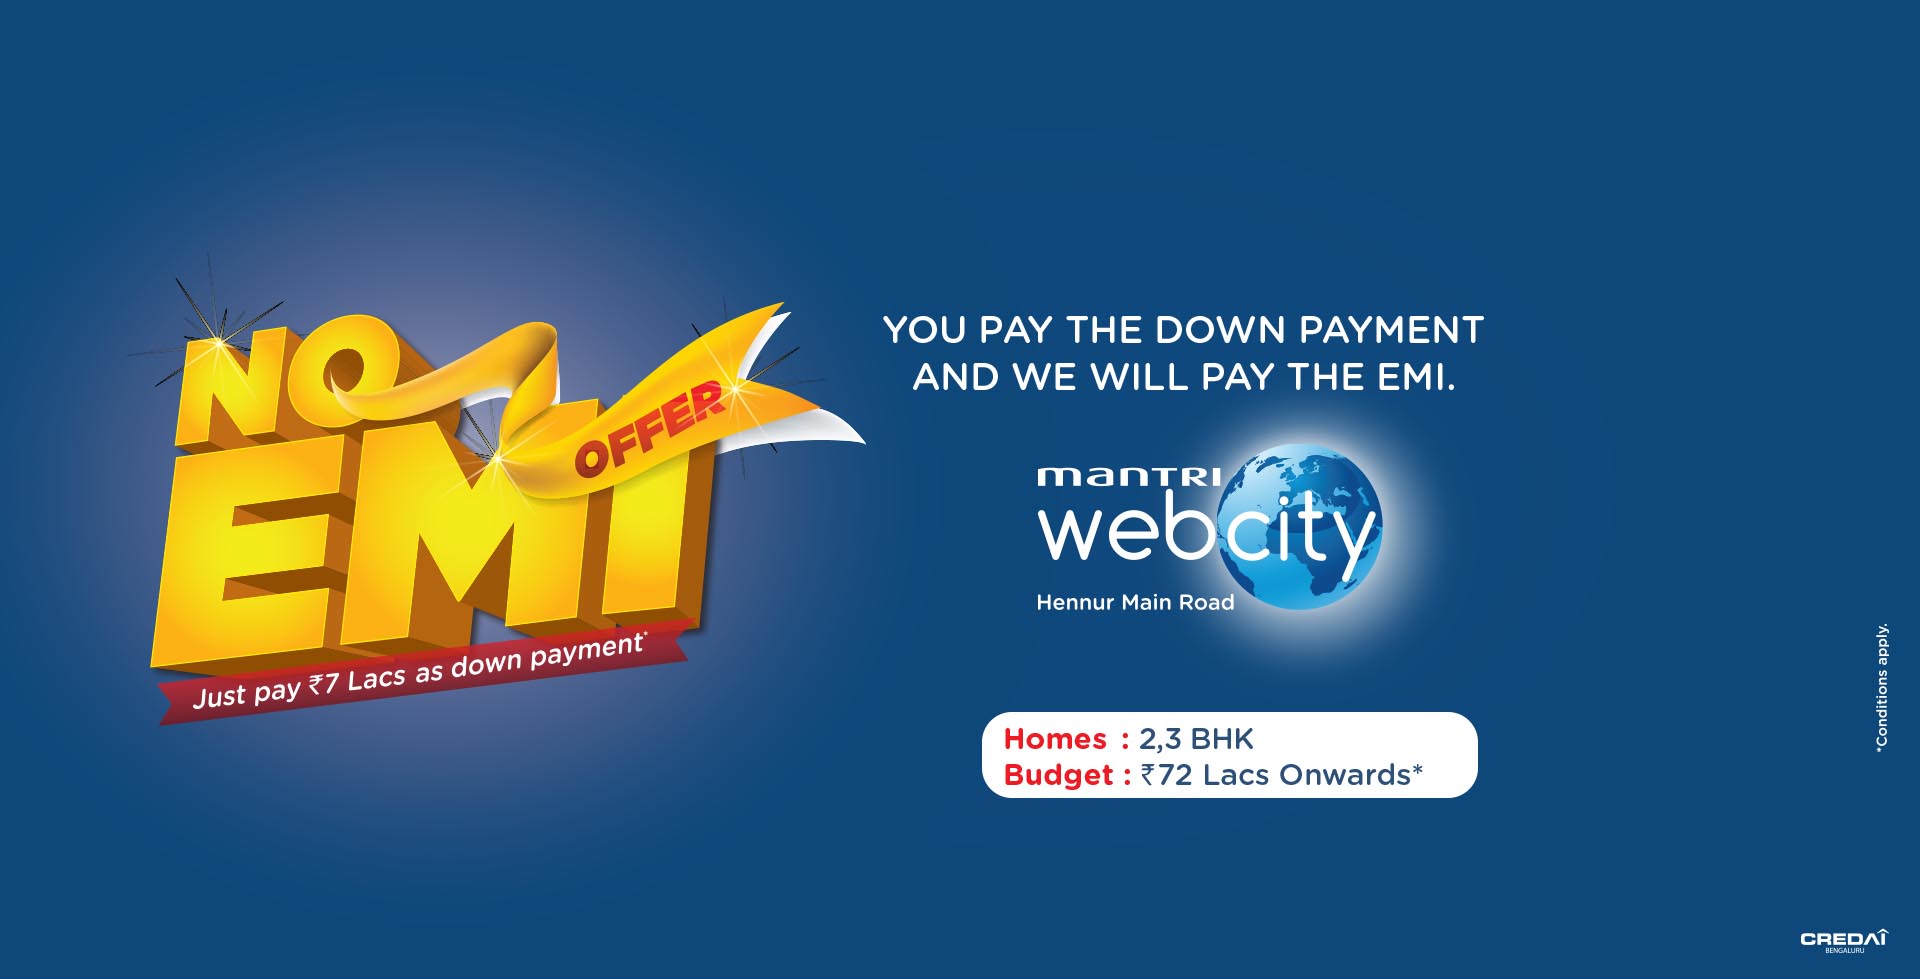 Just pay 7 Lacs as down payment and Mantri Web City will take care of the EMI